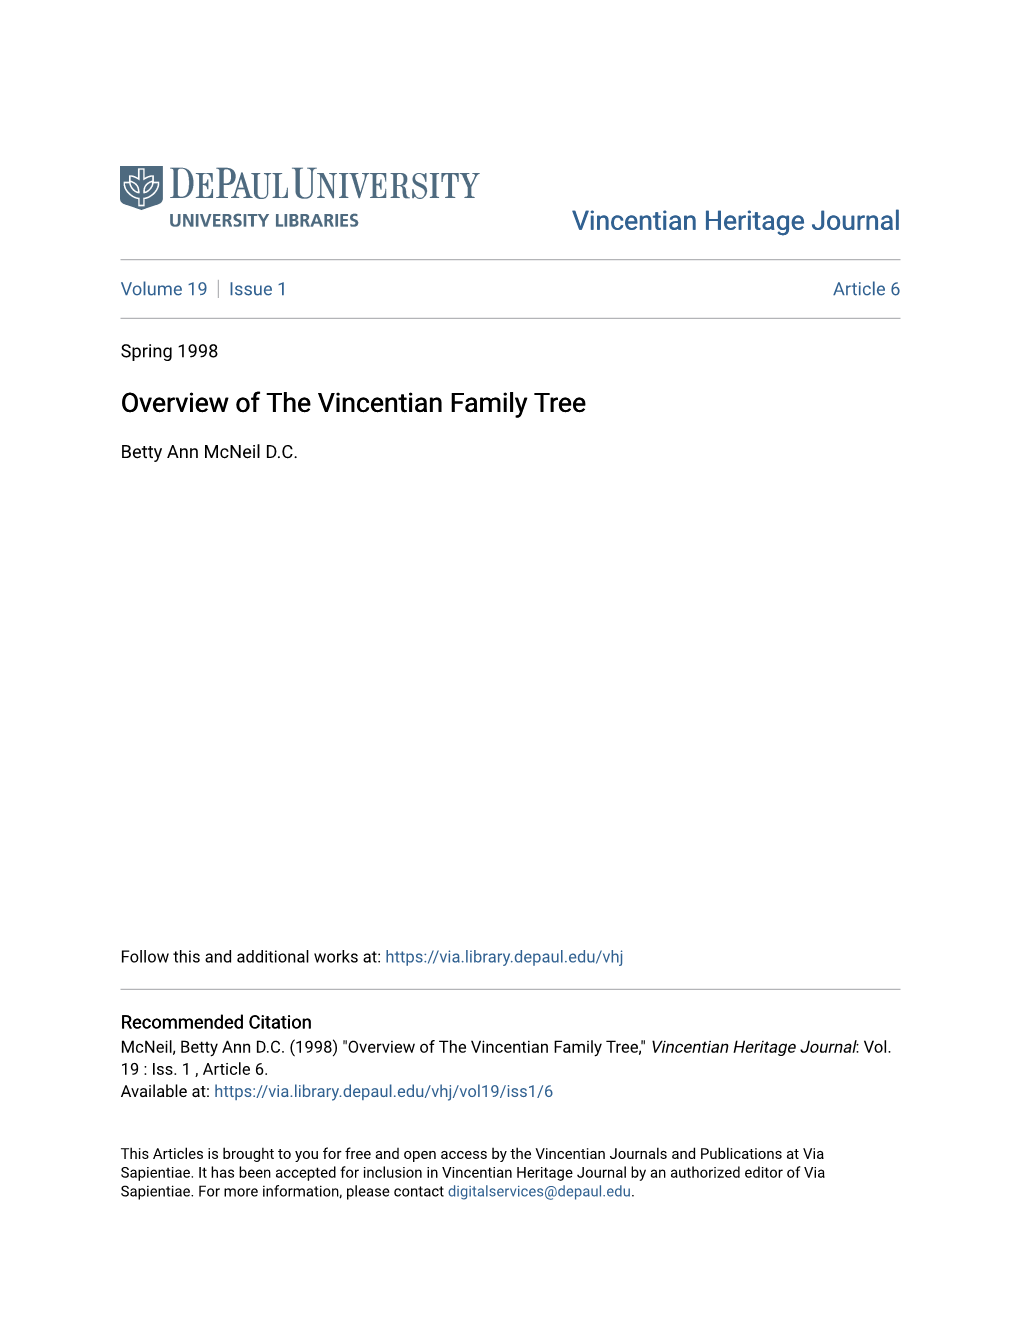 Overview of the Vincentian Family Tree